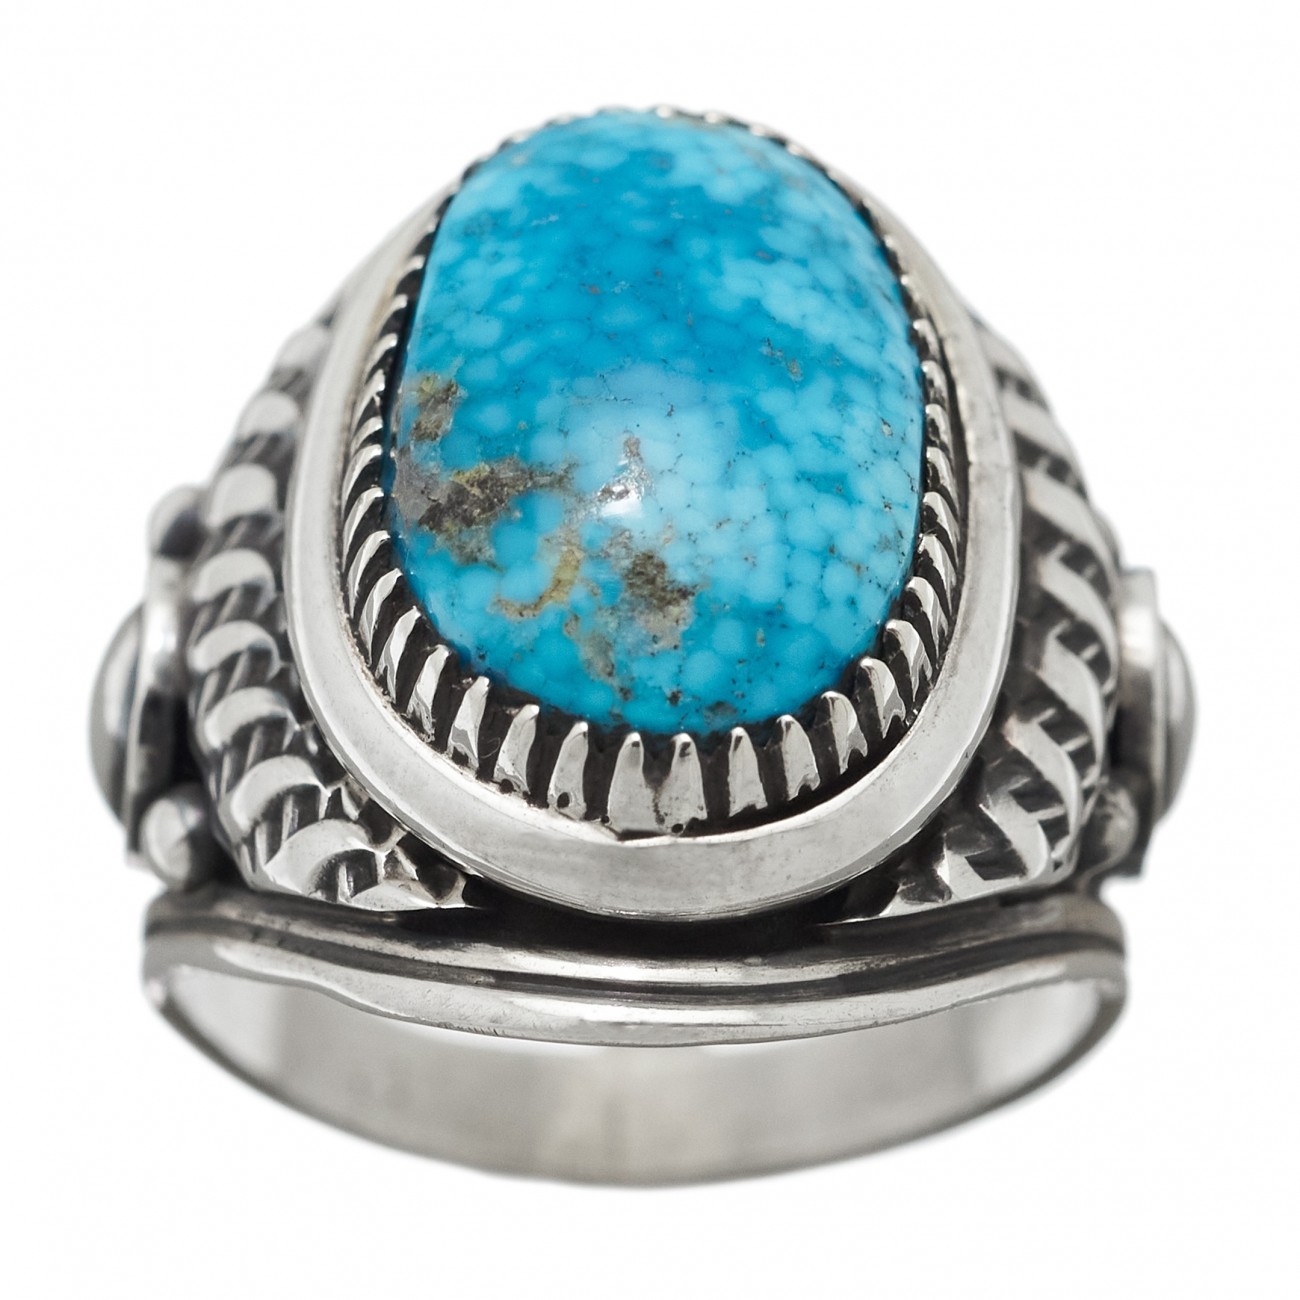 Navajo ring BA375 in turquoise and silver for men - Harpo Paris